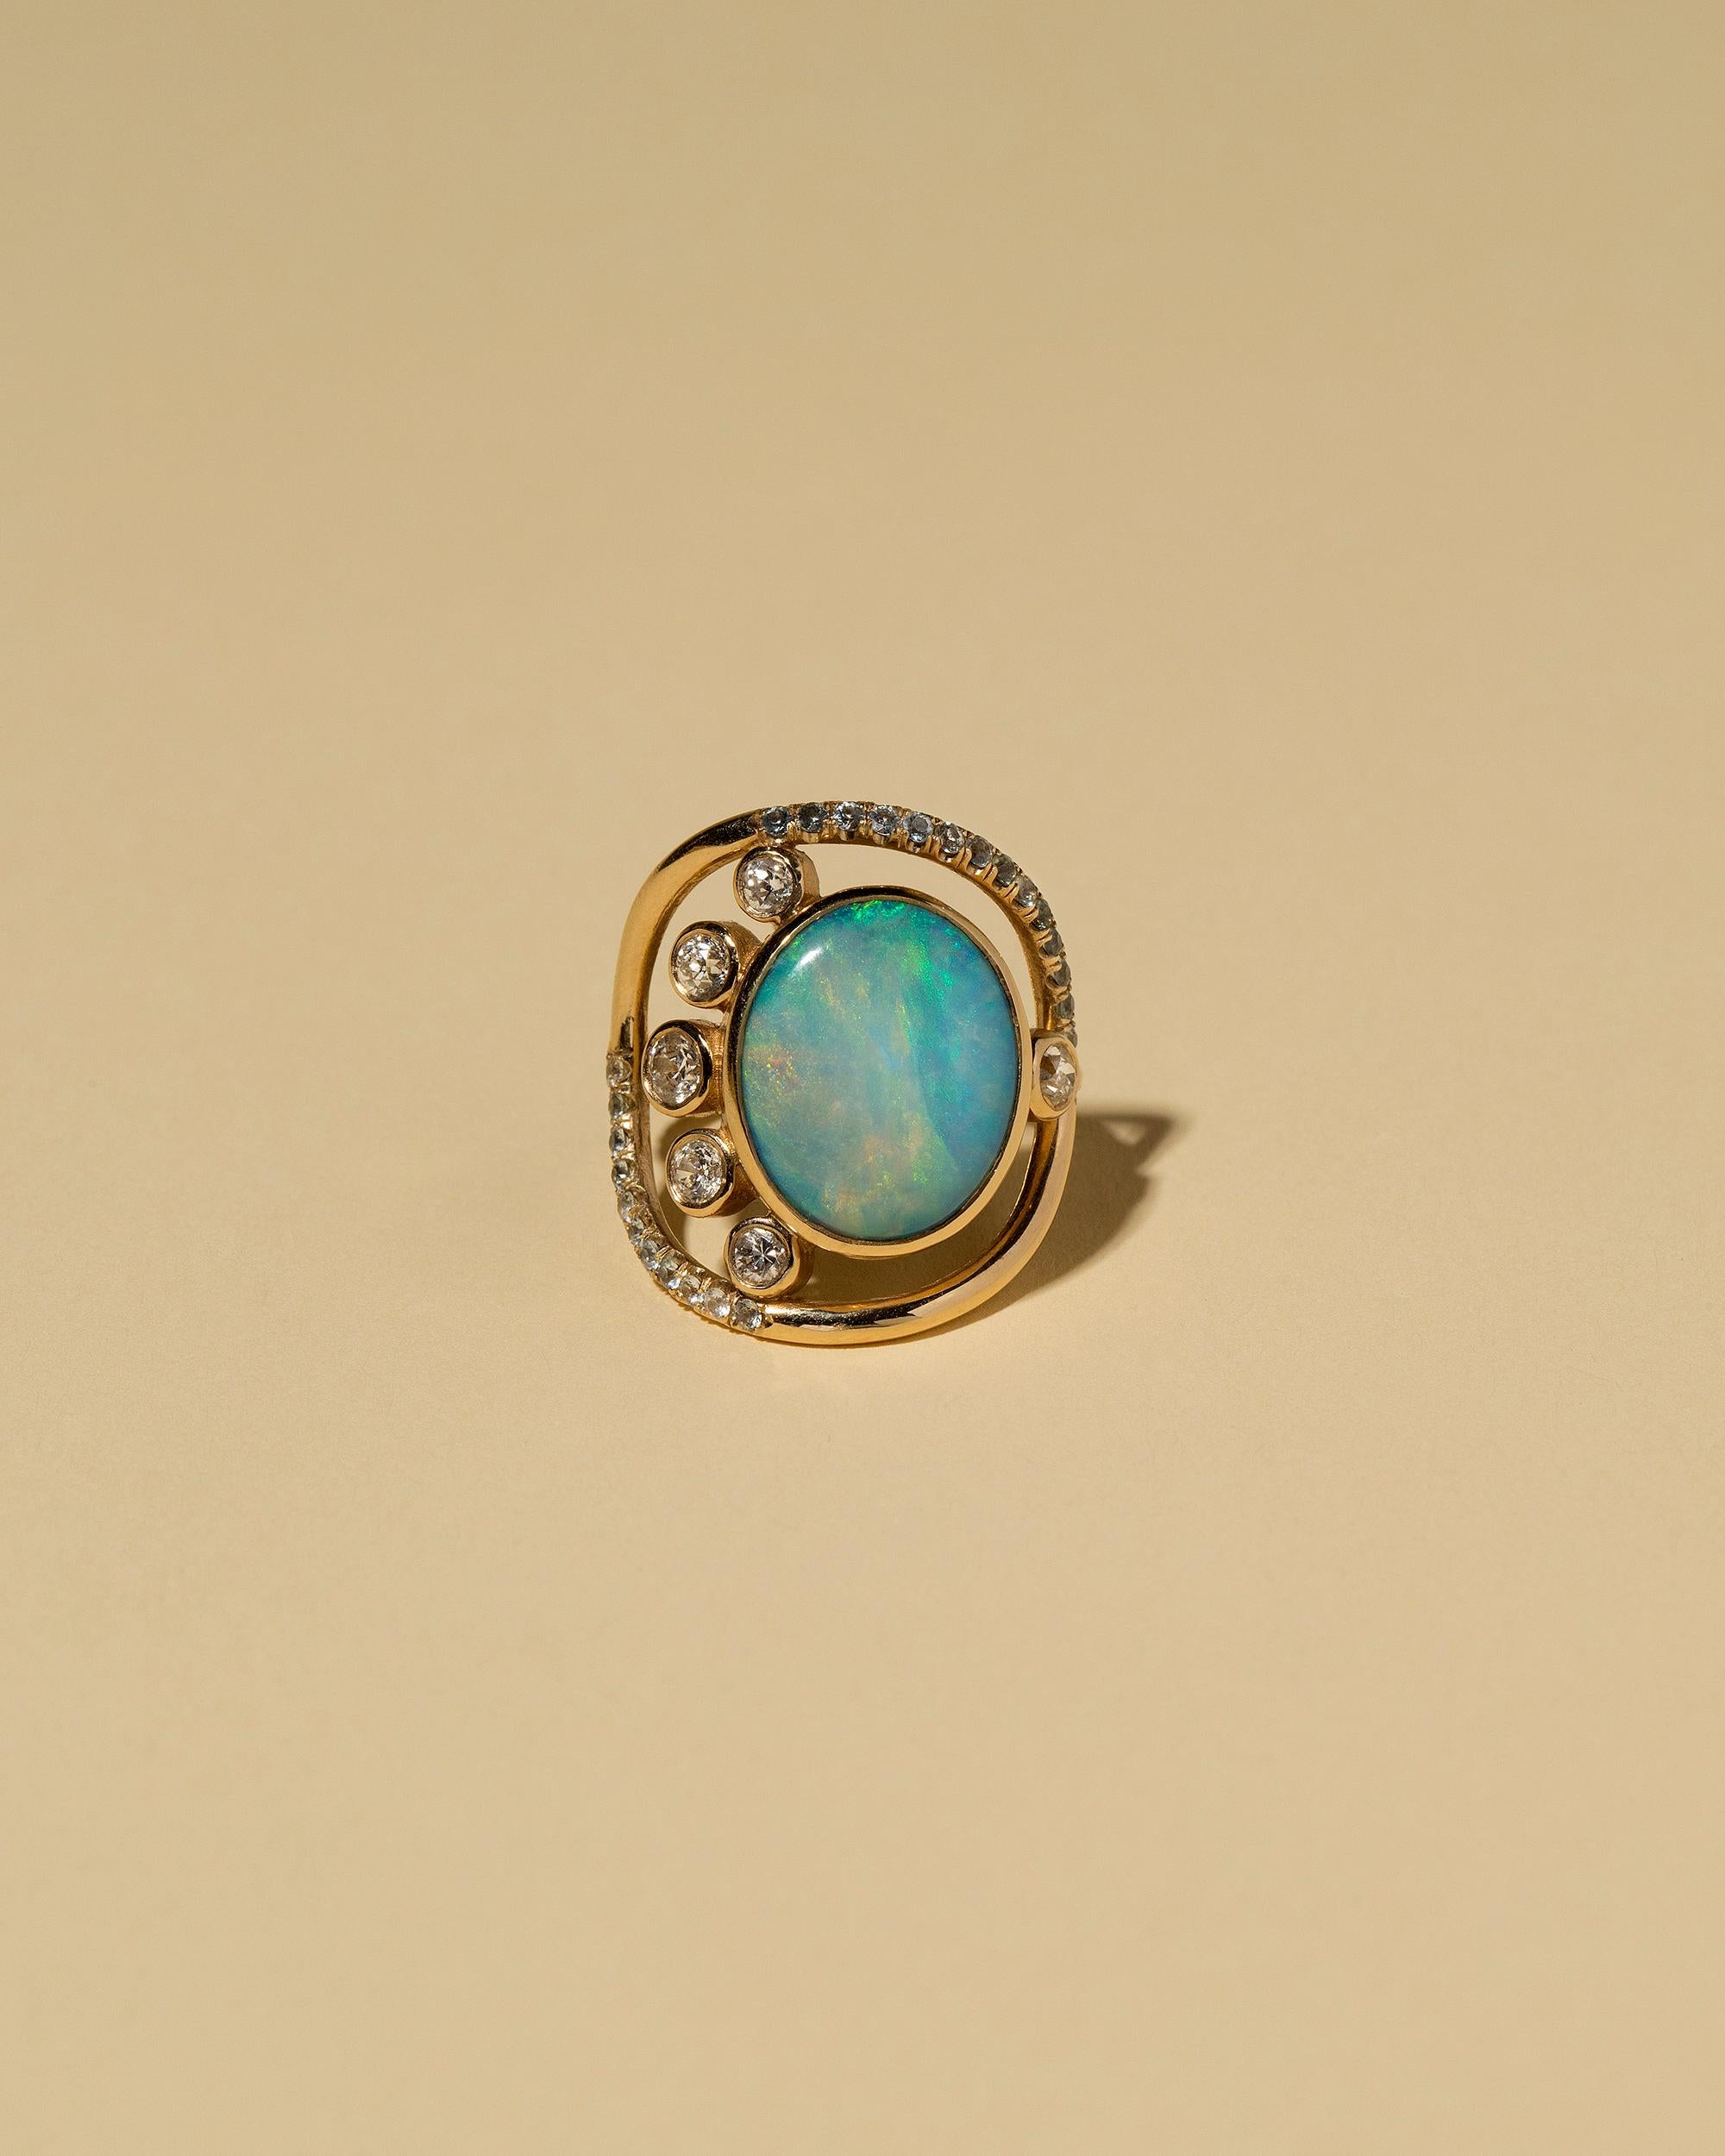 One-of-a-kind stone cluster ring

Australian, black opal cabochon weighs 4.29 ct.

Six bezel set, round cut, white diamonds have a total gem weight of 0.48 ct.

Thirty-one pavé set, blue, Montana sapphires have a total gem weight of 0.37 ct.

Round